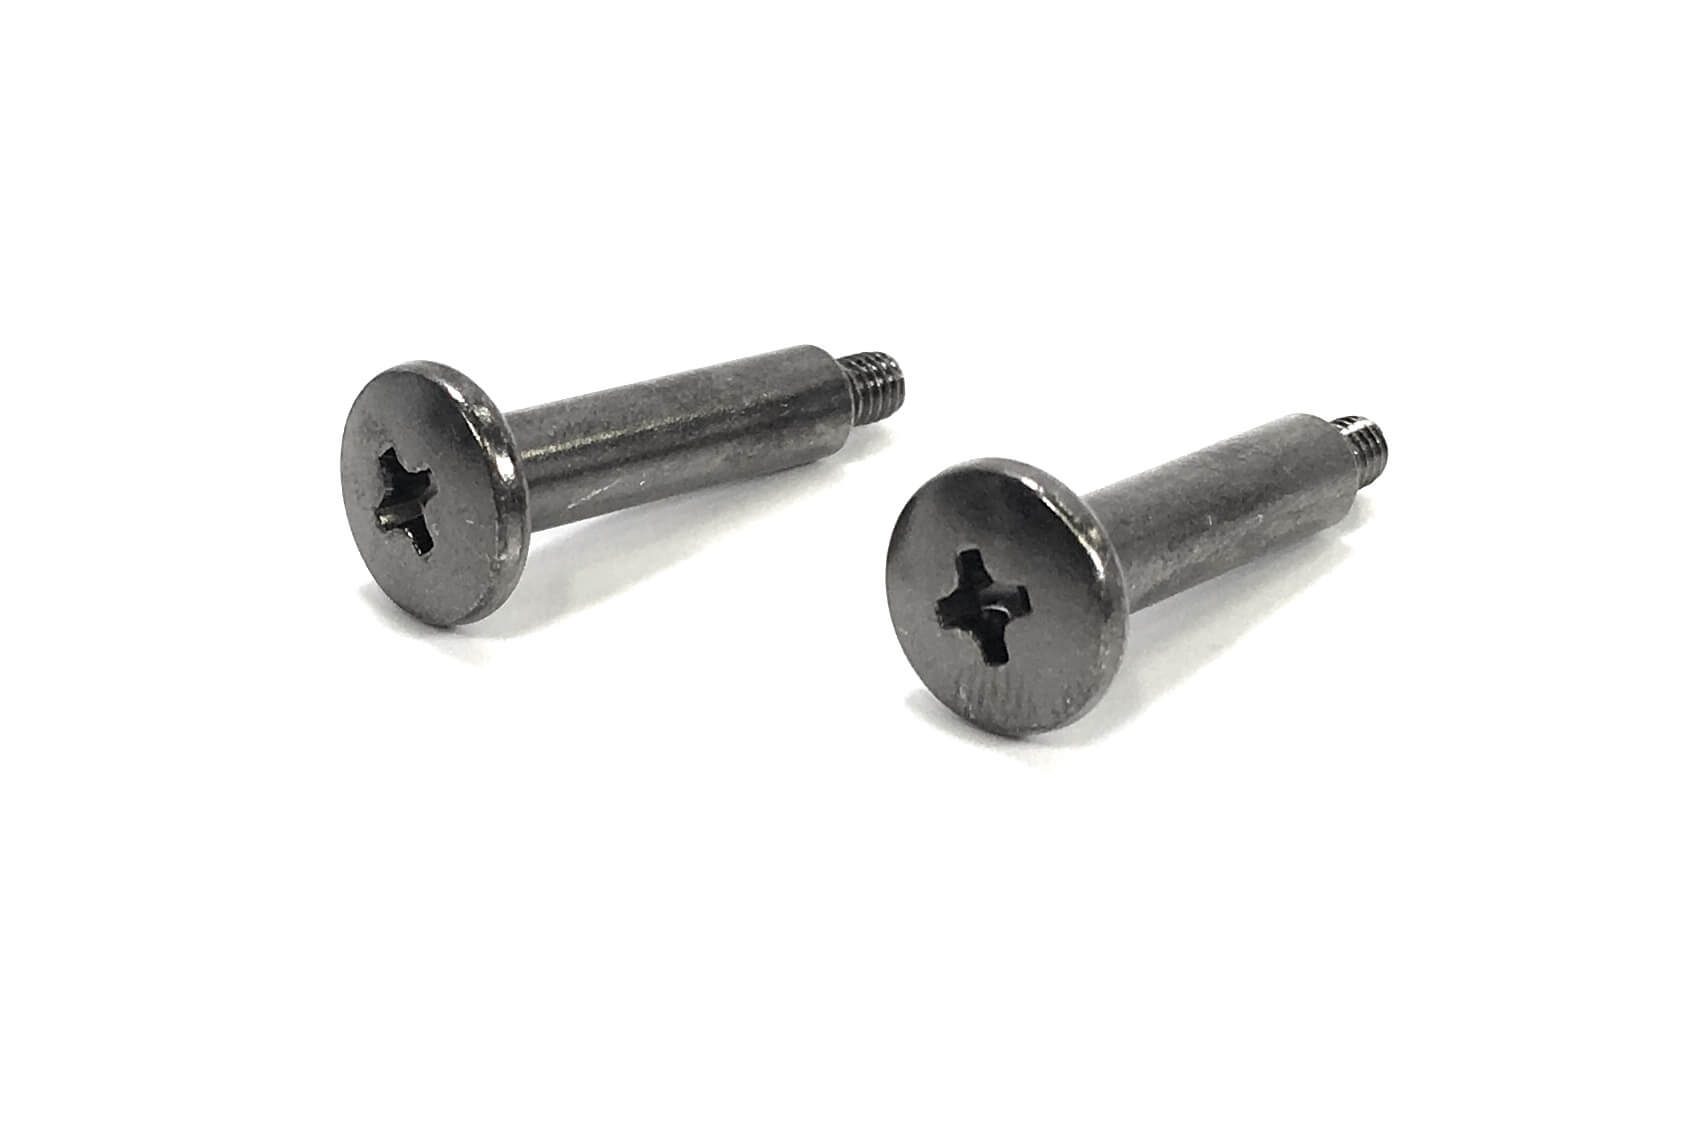 Original Microphone Holder screws that fit on the the Canon XA20 camcorder. It is a genuine Canon part, sourced directly from Canon USA. Brand new factory fresh. Free Shipping.